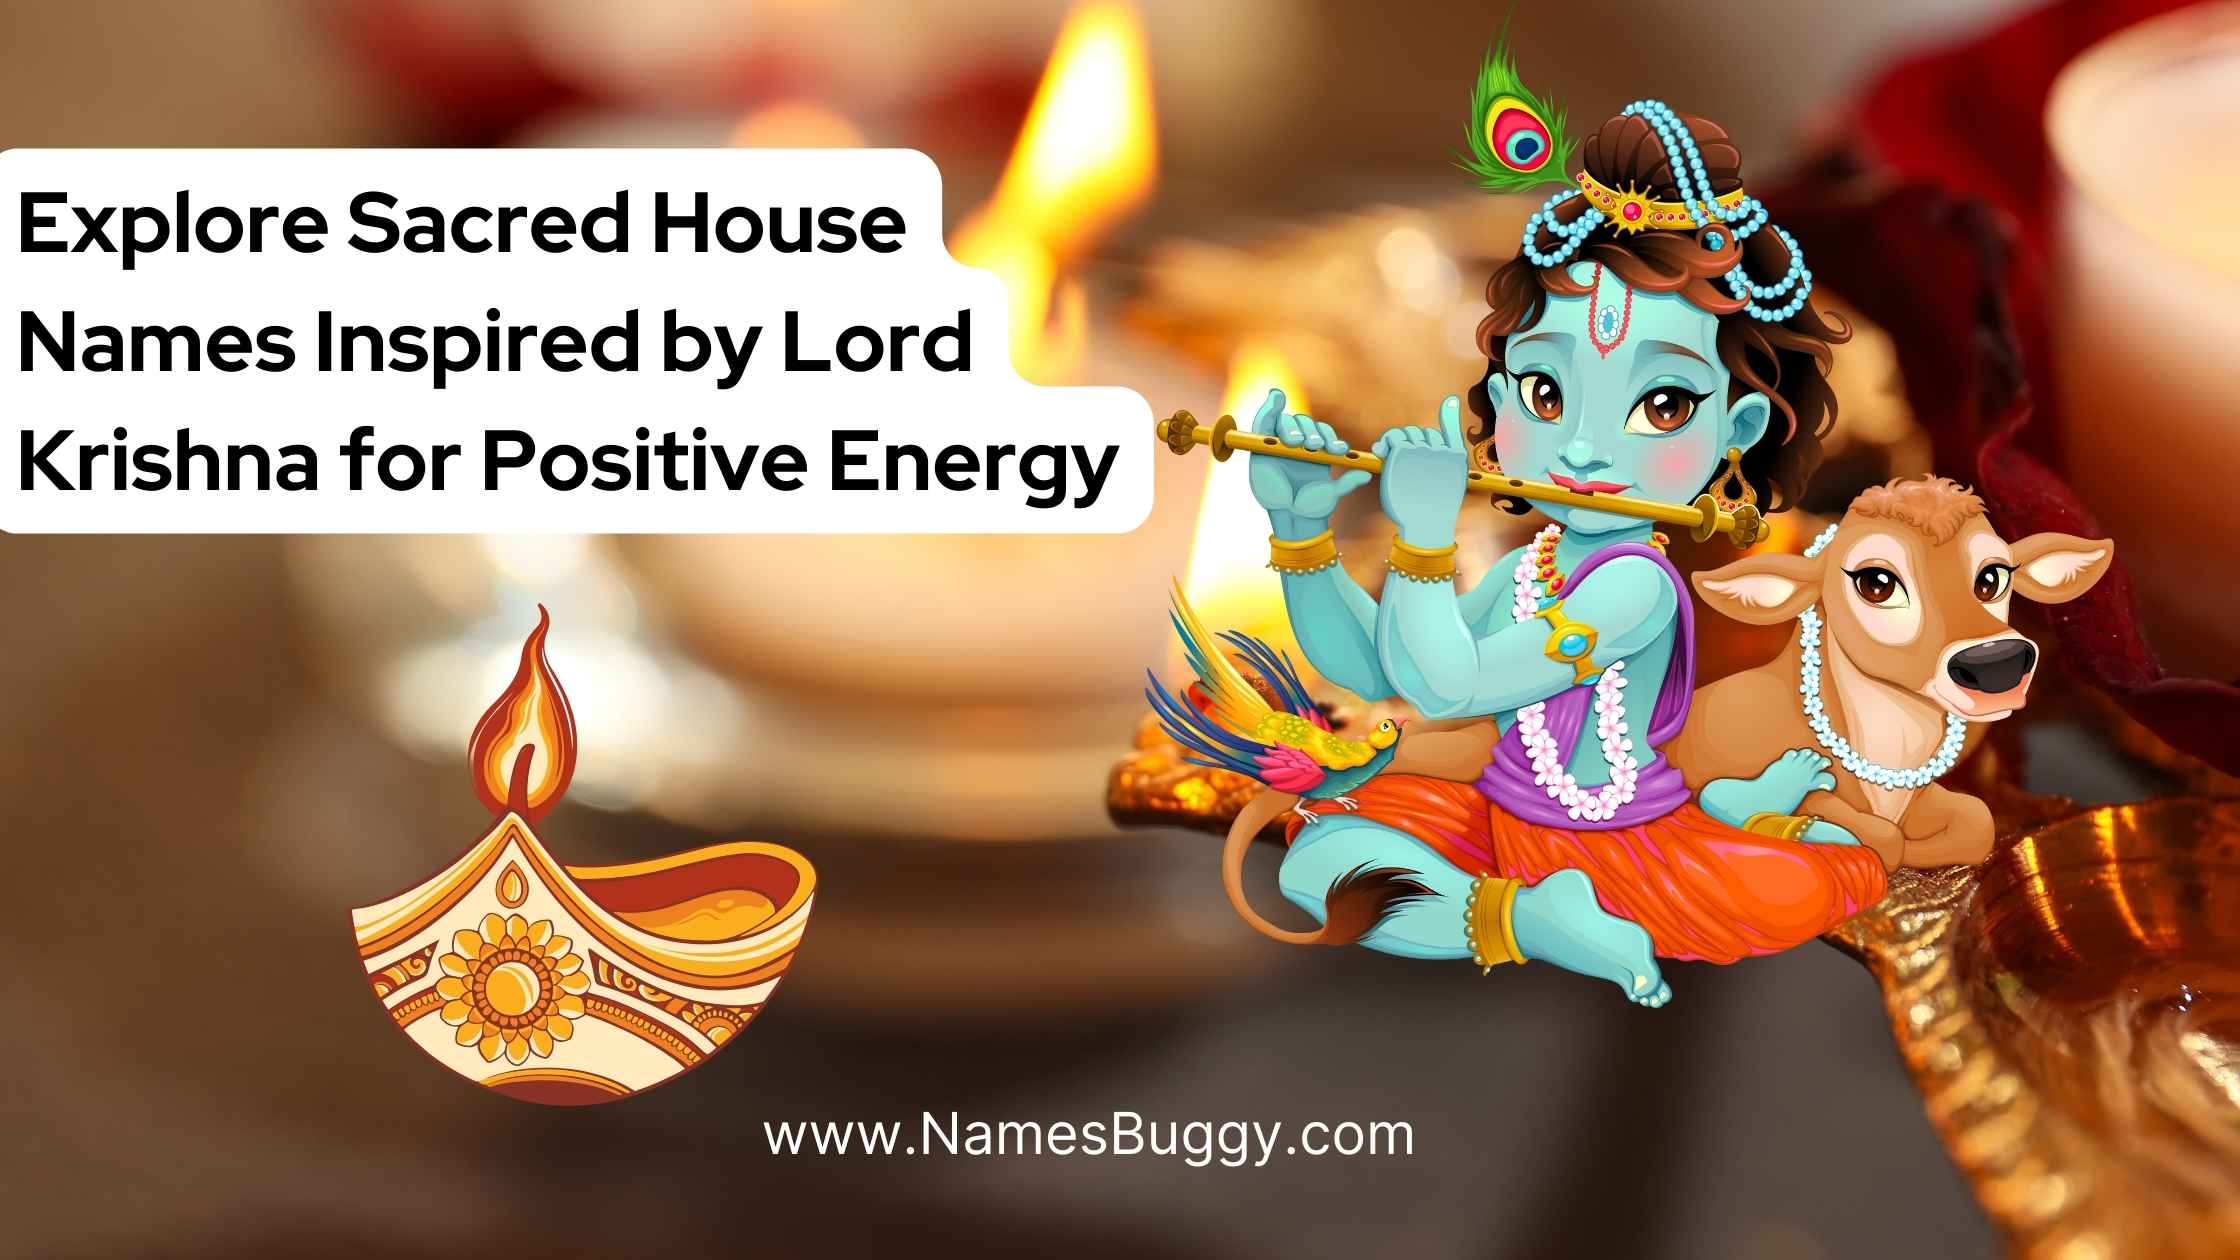 Explore Sacred House Names Inspired by Lord Krishna for Positive Energy